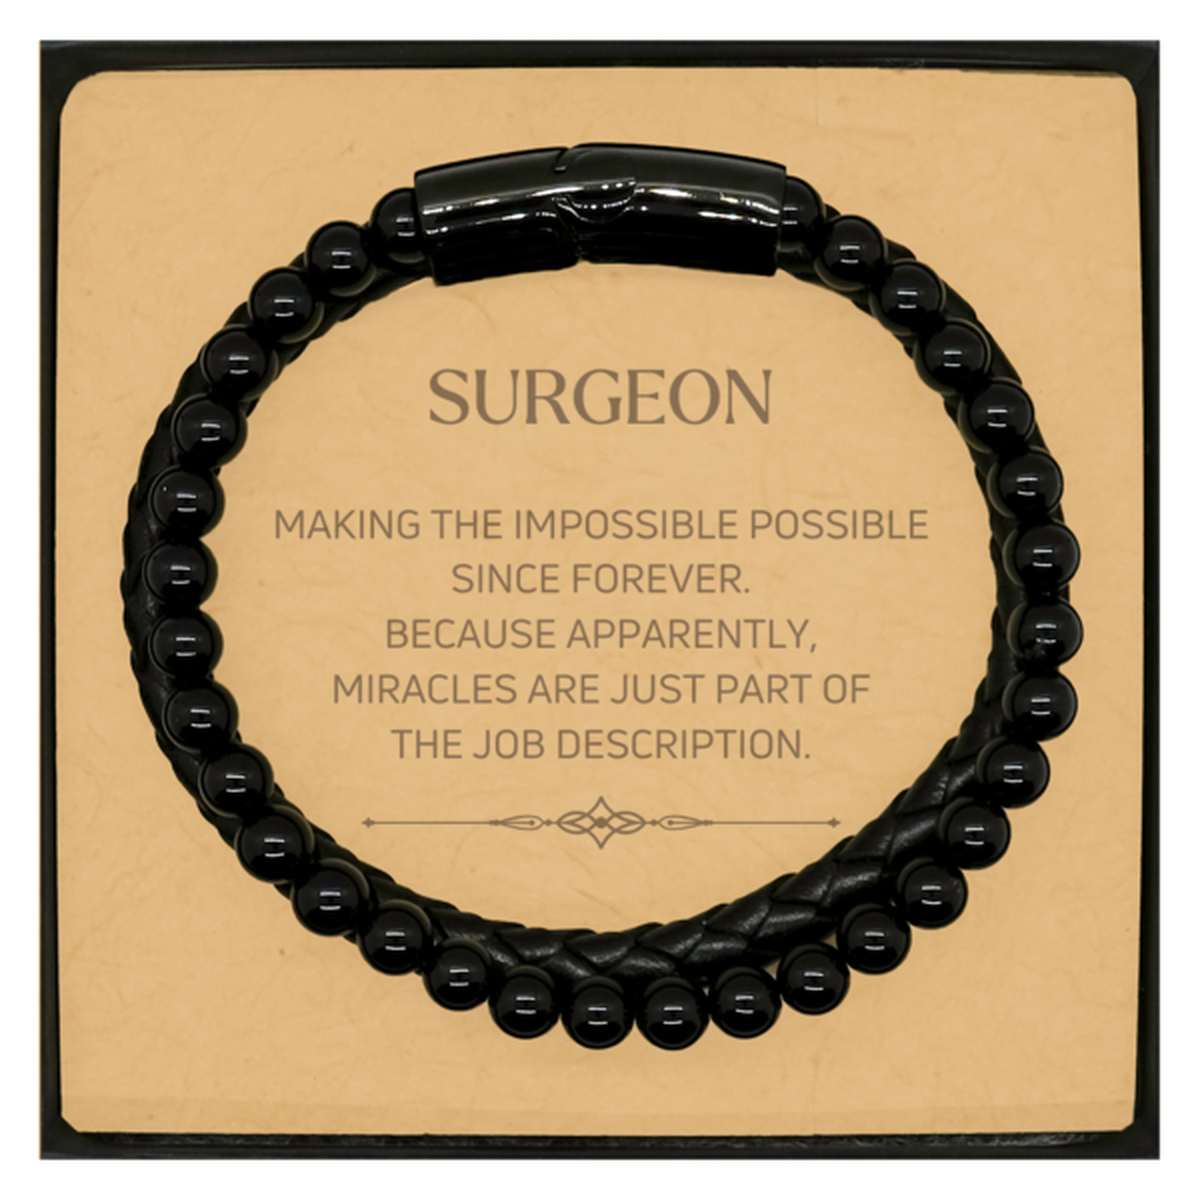 Funny Surgeon Gifts, Miracles are just part of the job description, Inspirational Birthday Christmas Stone Leather Bracelets For Surgeon, Men, Women, Coworkers, Friends, Boss